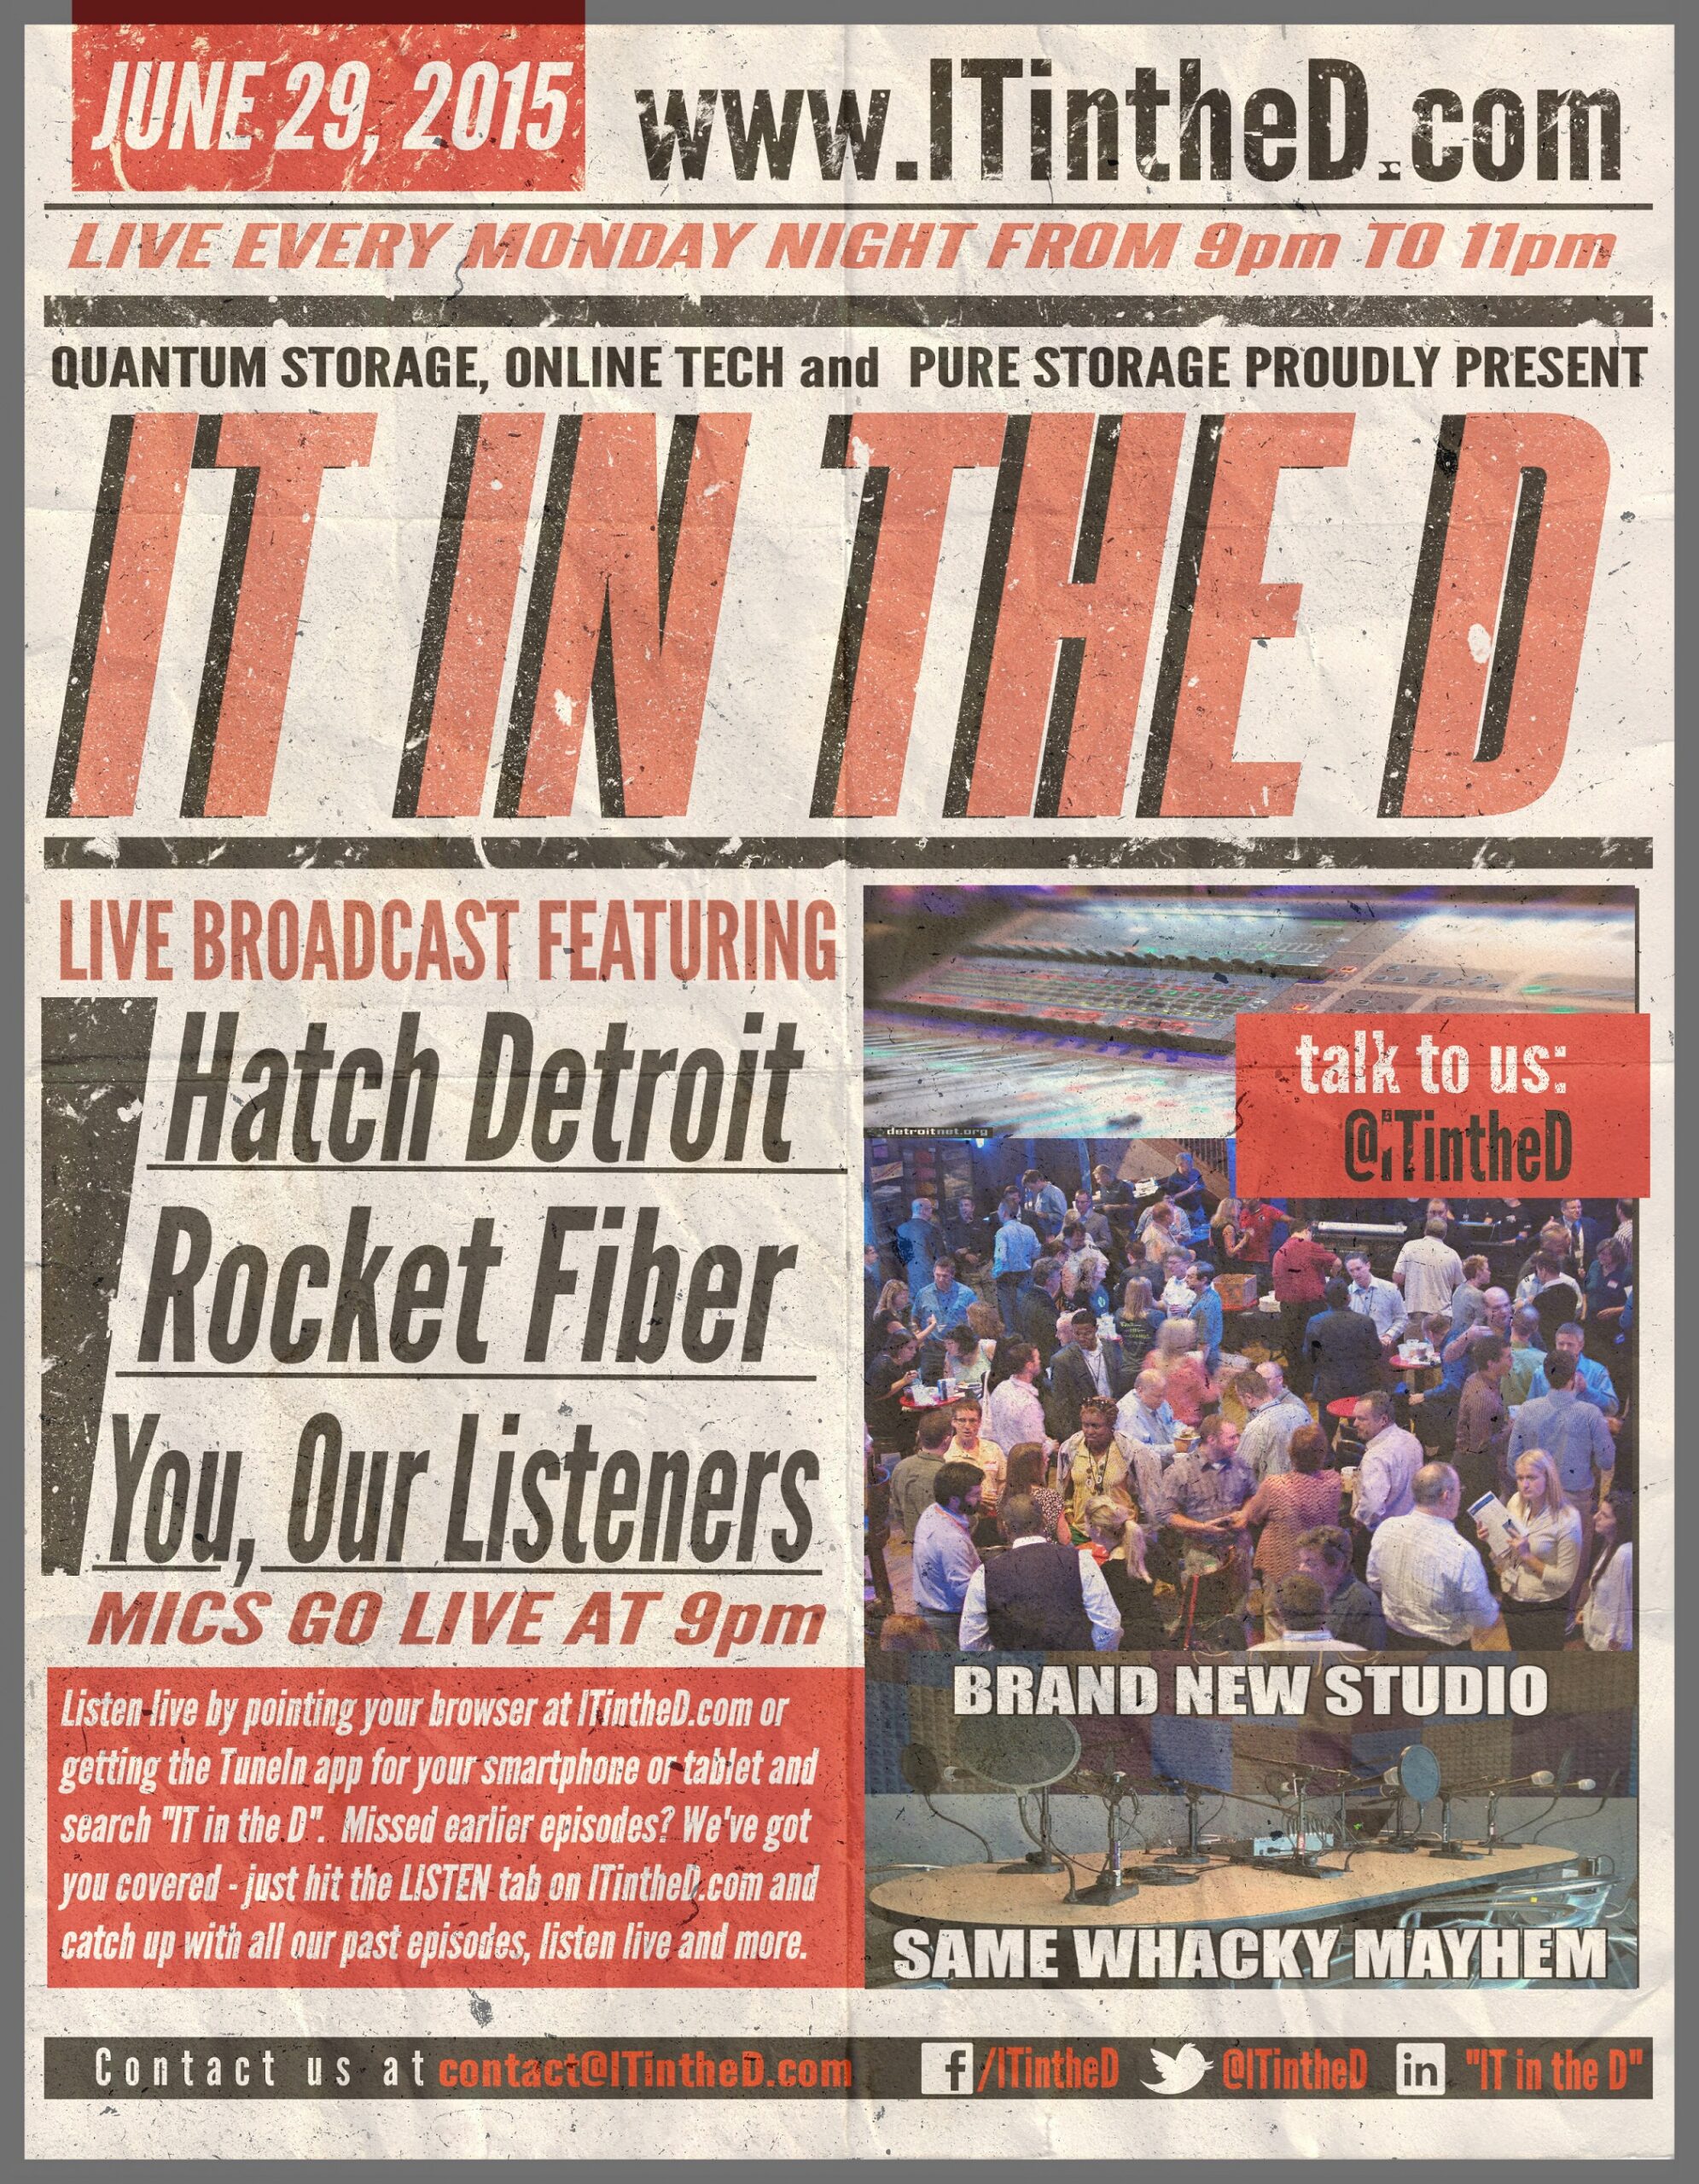 Hatch Detroit and Rocket Fiber In Studio Tonight, Event Wednesday Night and More for 6/29/2015